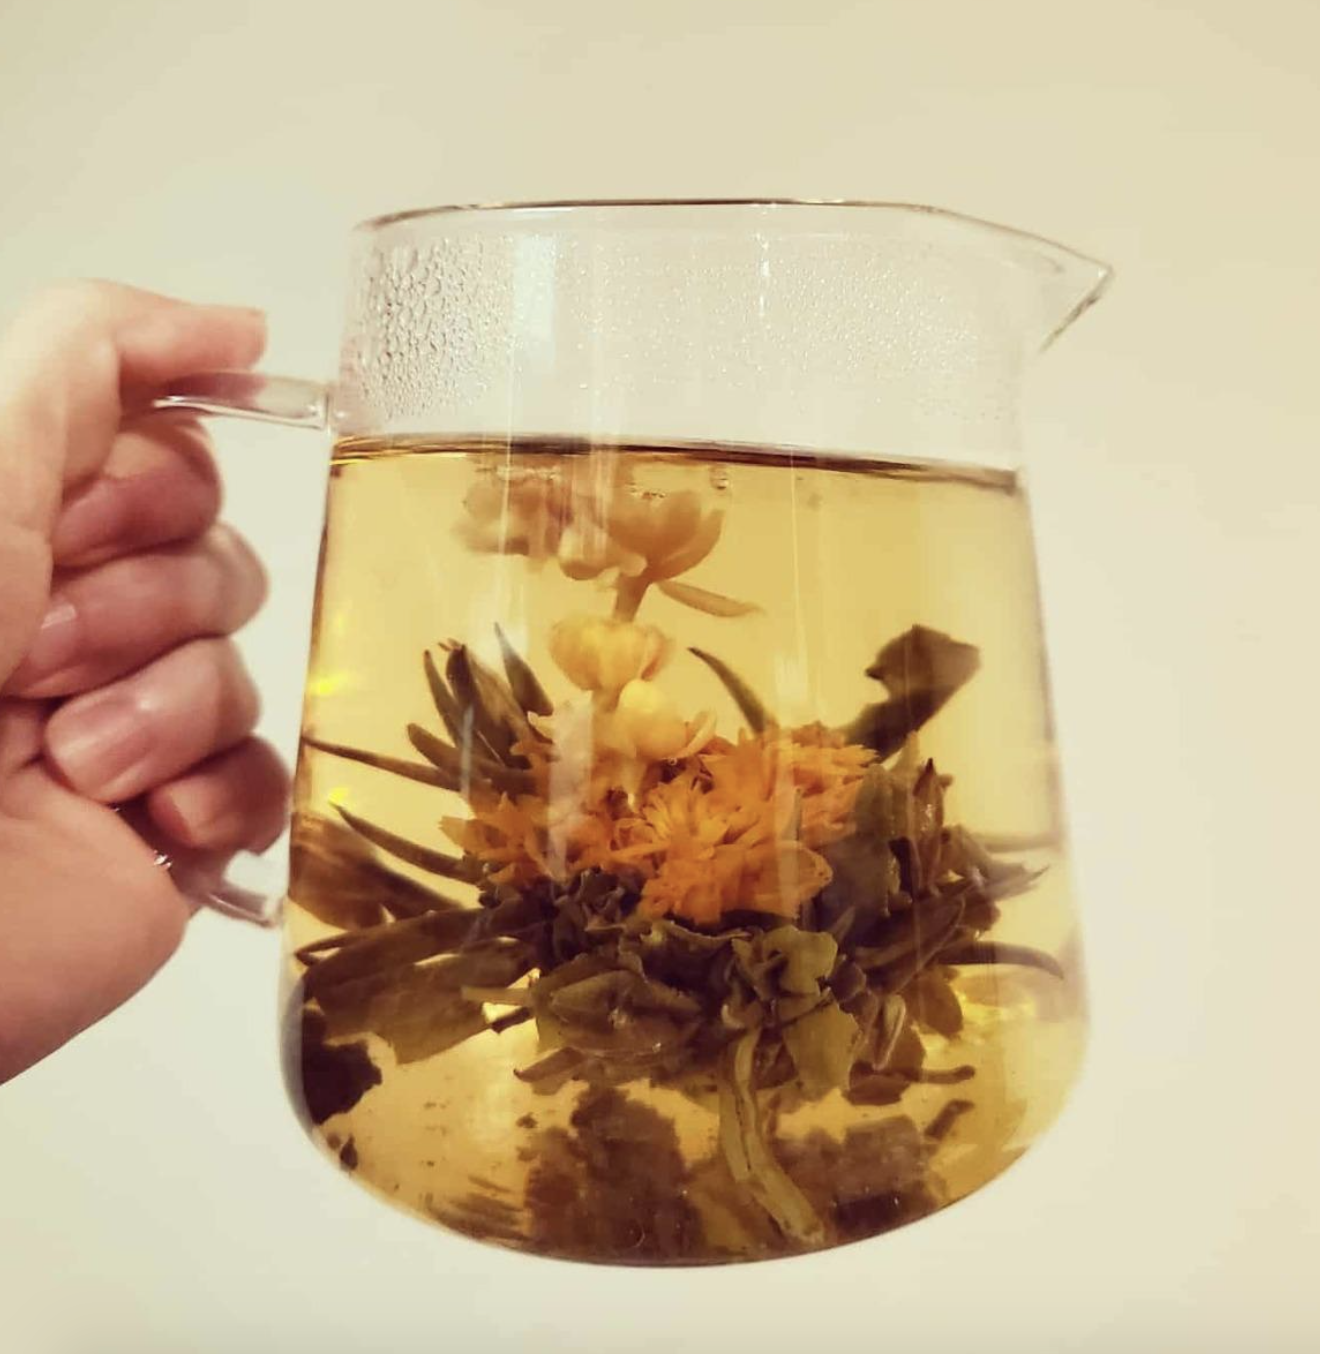 reviewer holding clear pitcher with blooming tea inside